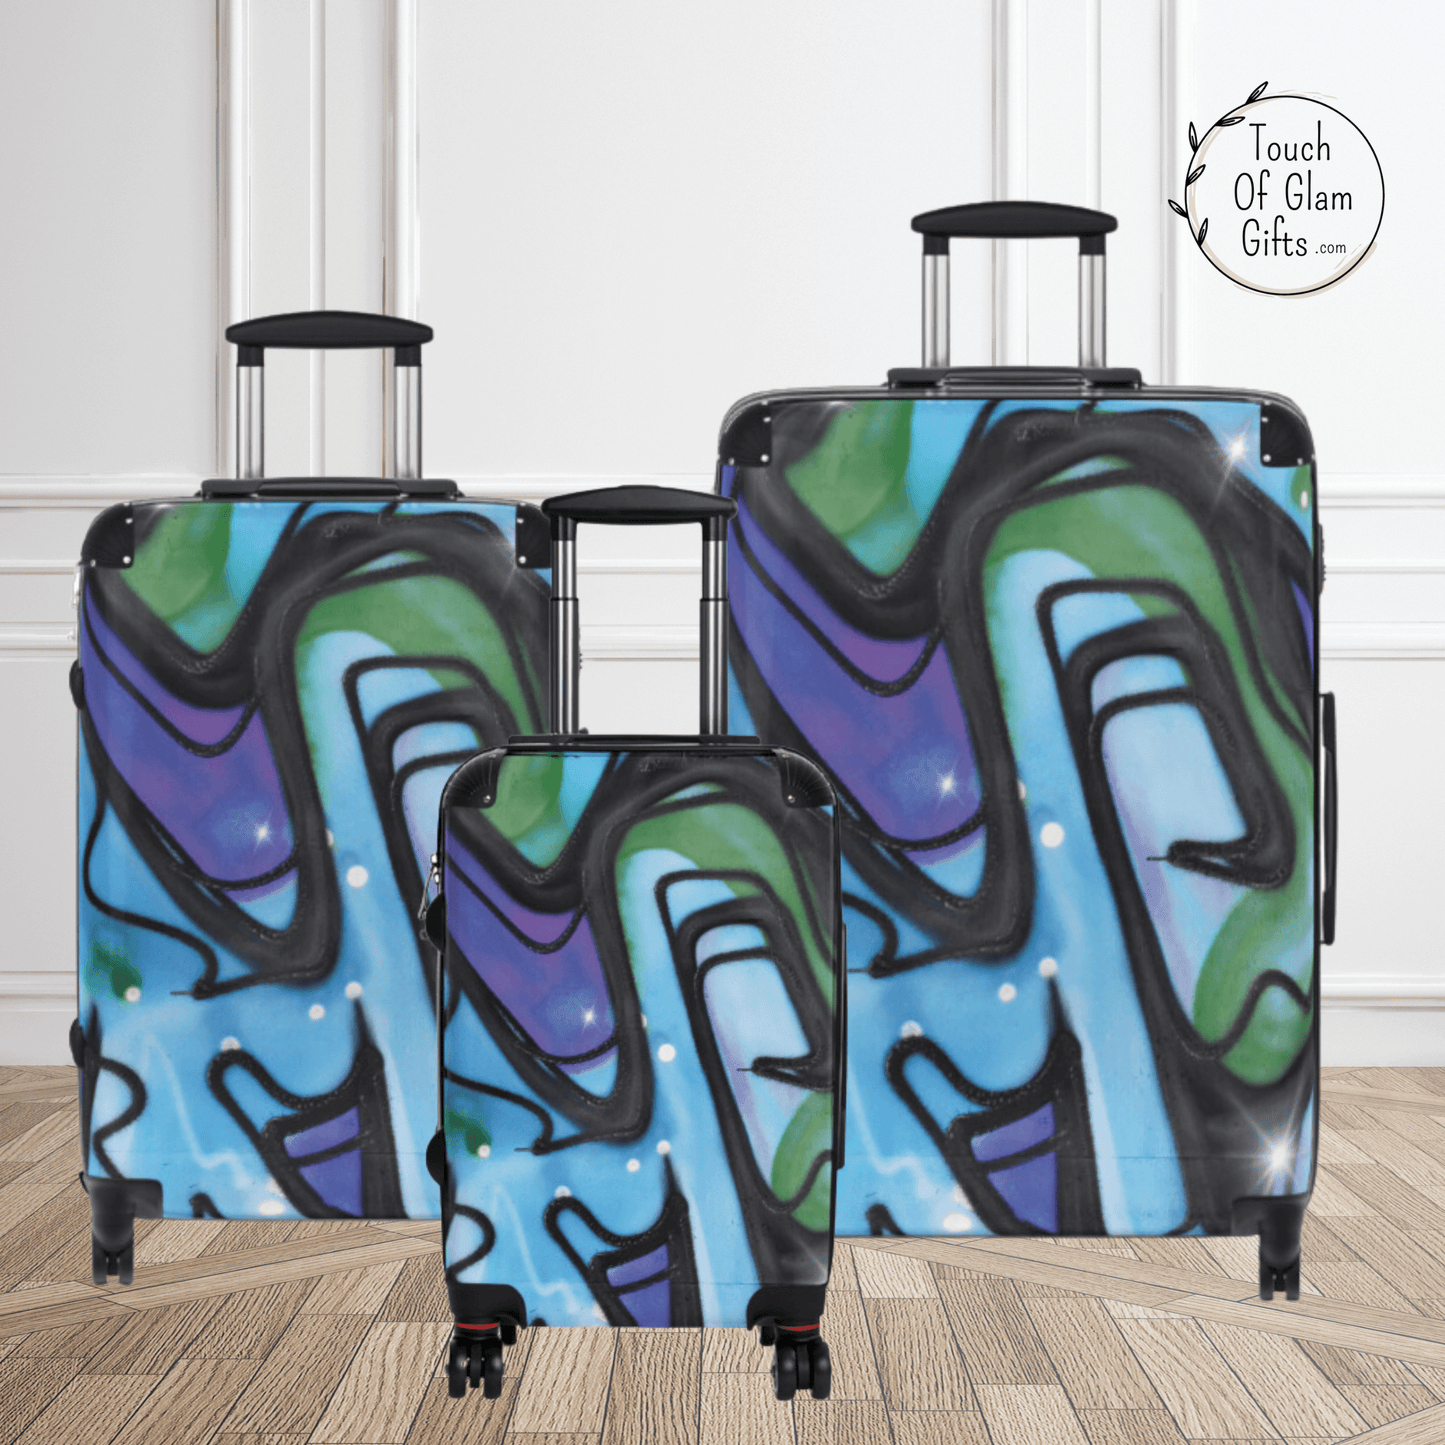 Our line of blue graffiti custom designed luggage for kids and teens and people who love the color blue. Our luggage set comes in three sizes.